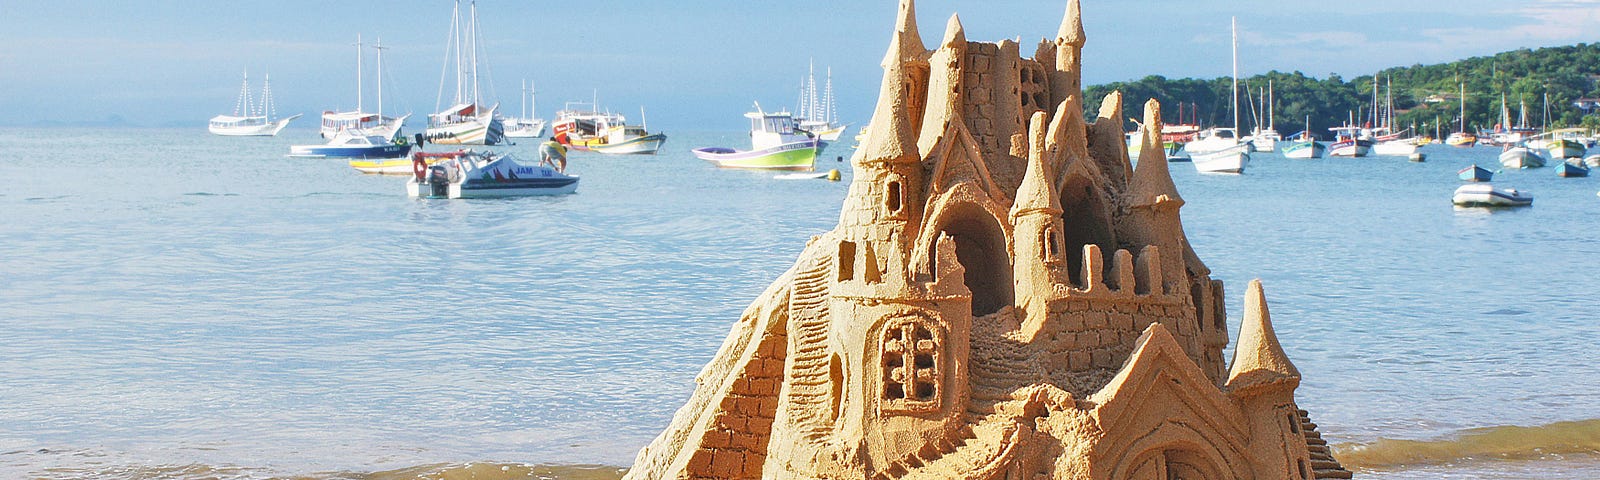 An ornate sandcastle be the sea. Boats are on the bay.